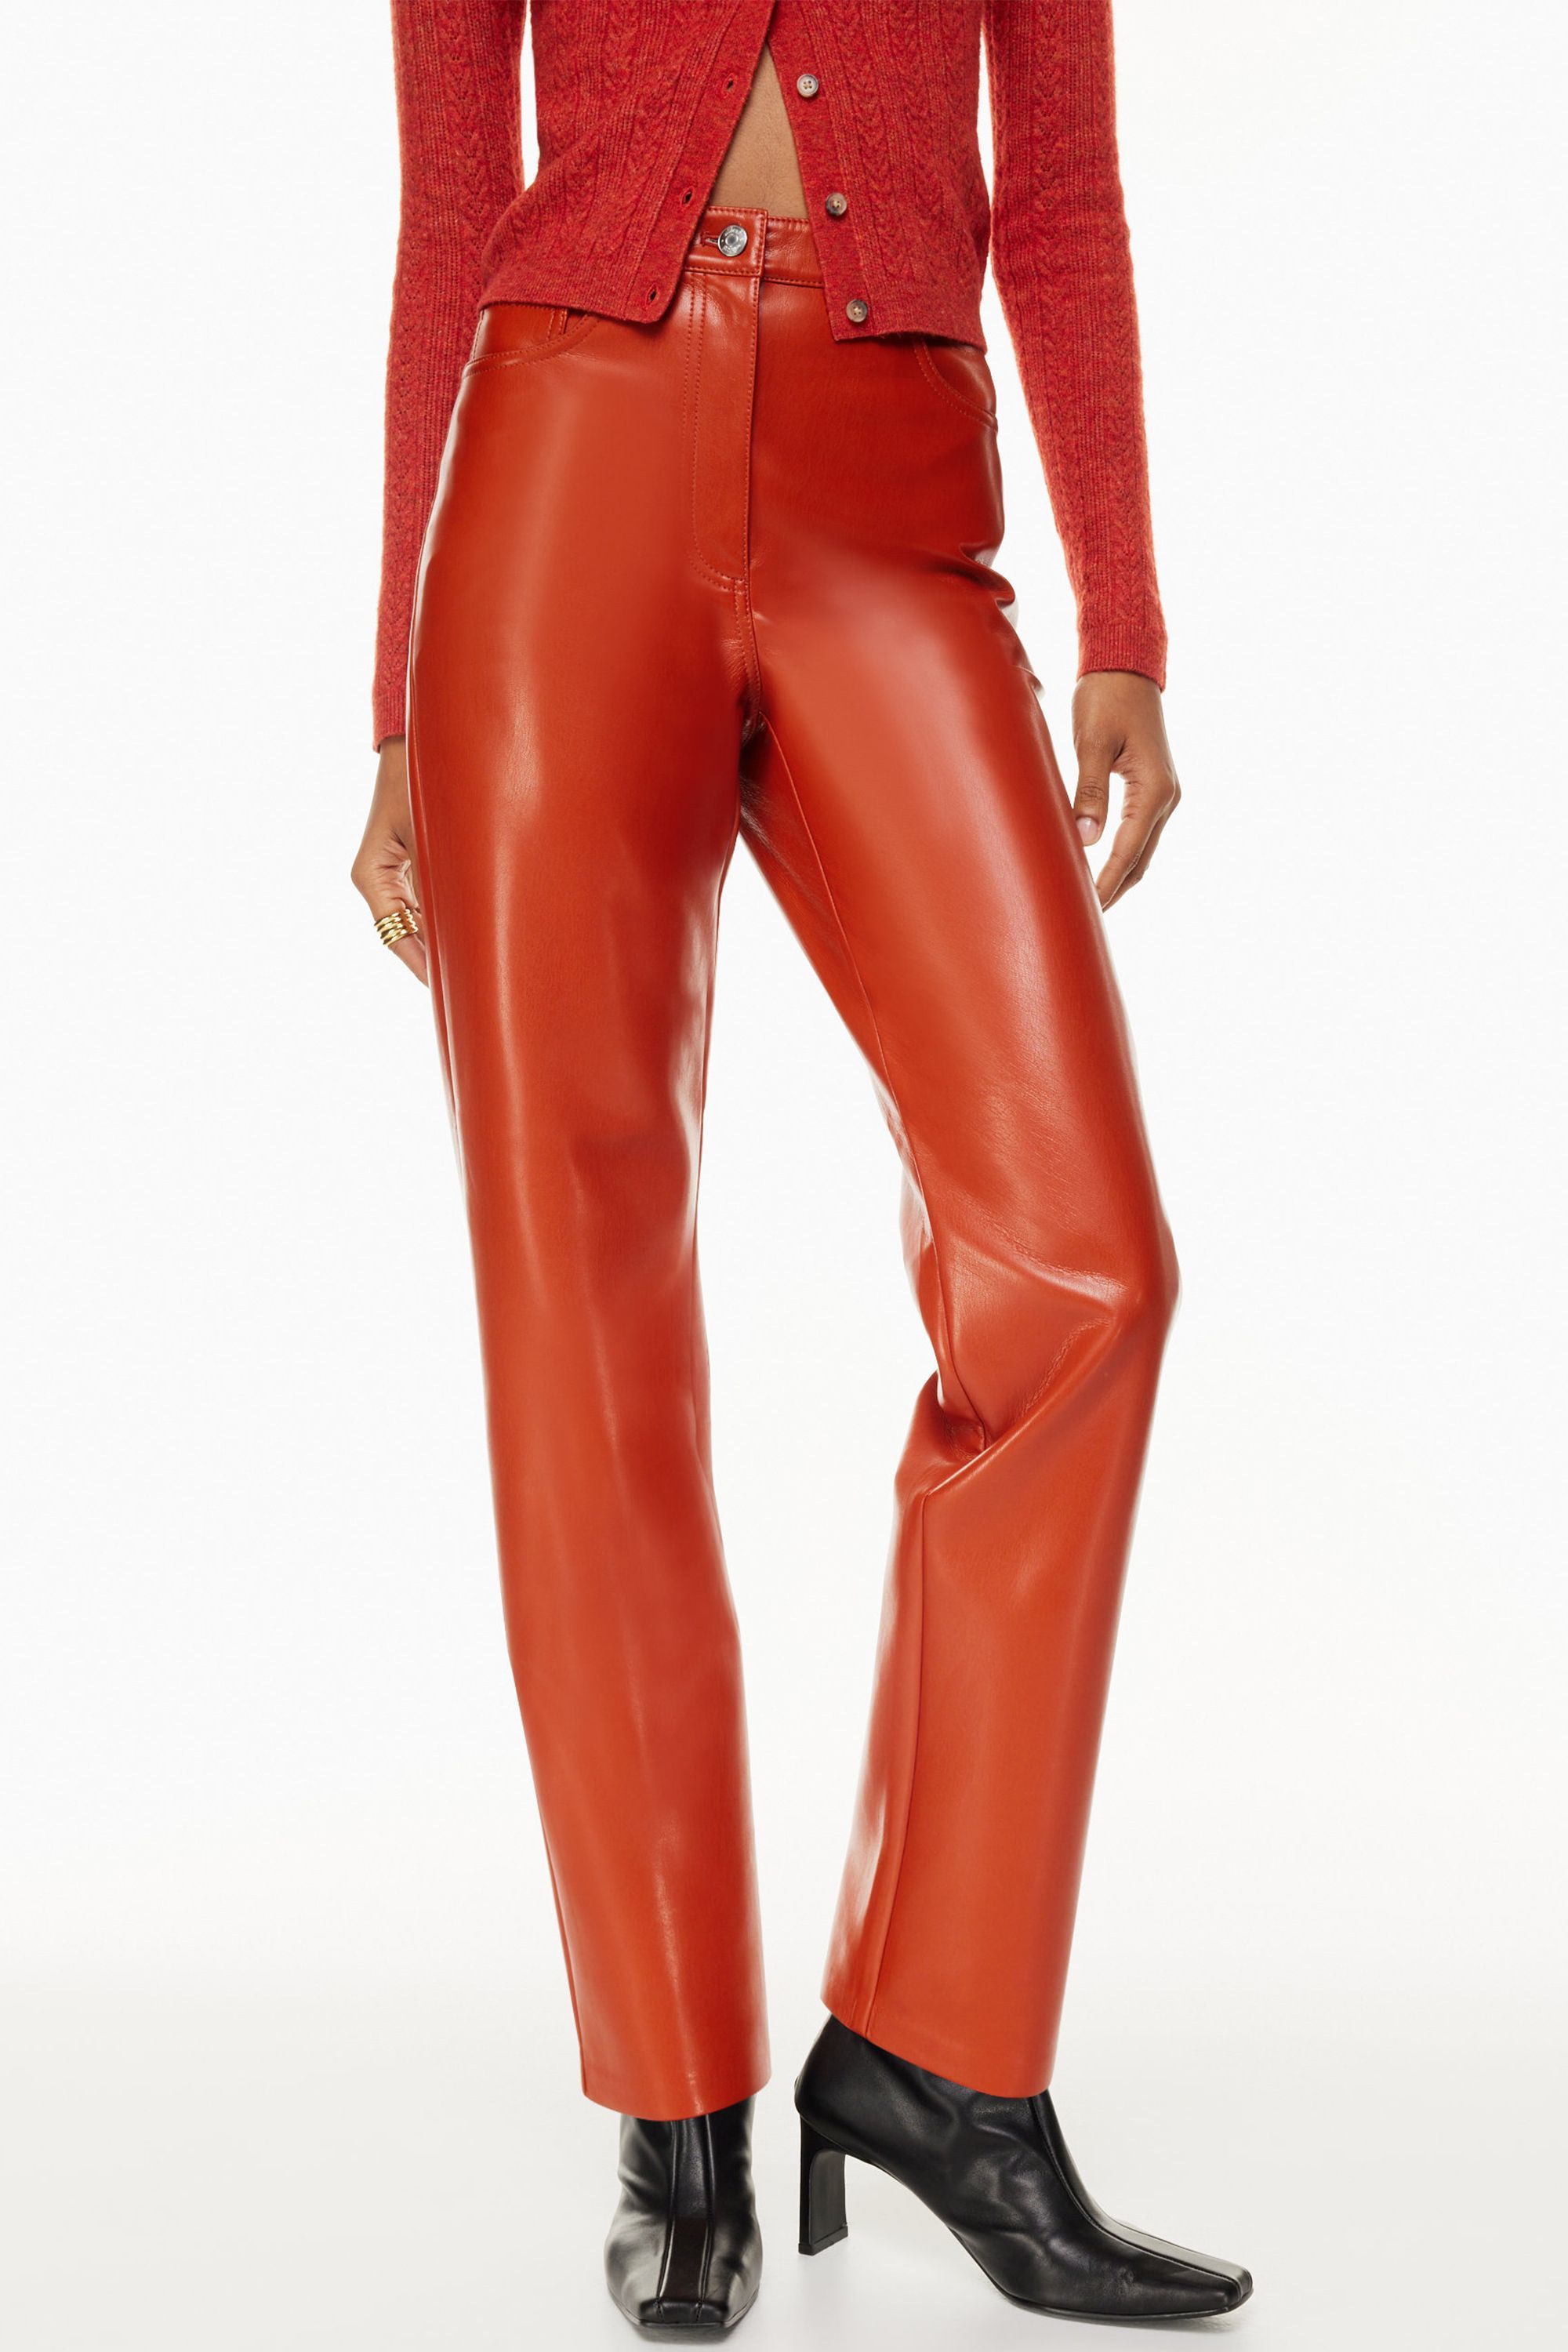 UNreal Patent Leather Trouser in Mahogany  Blue Revival